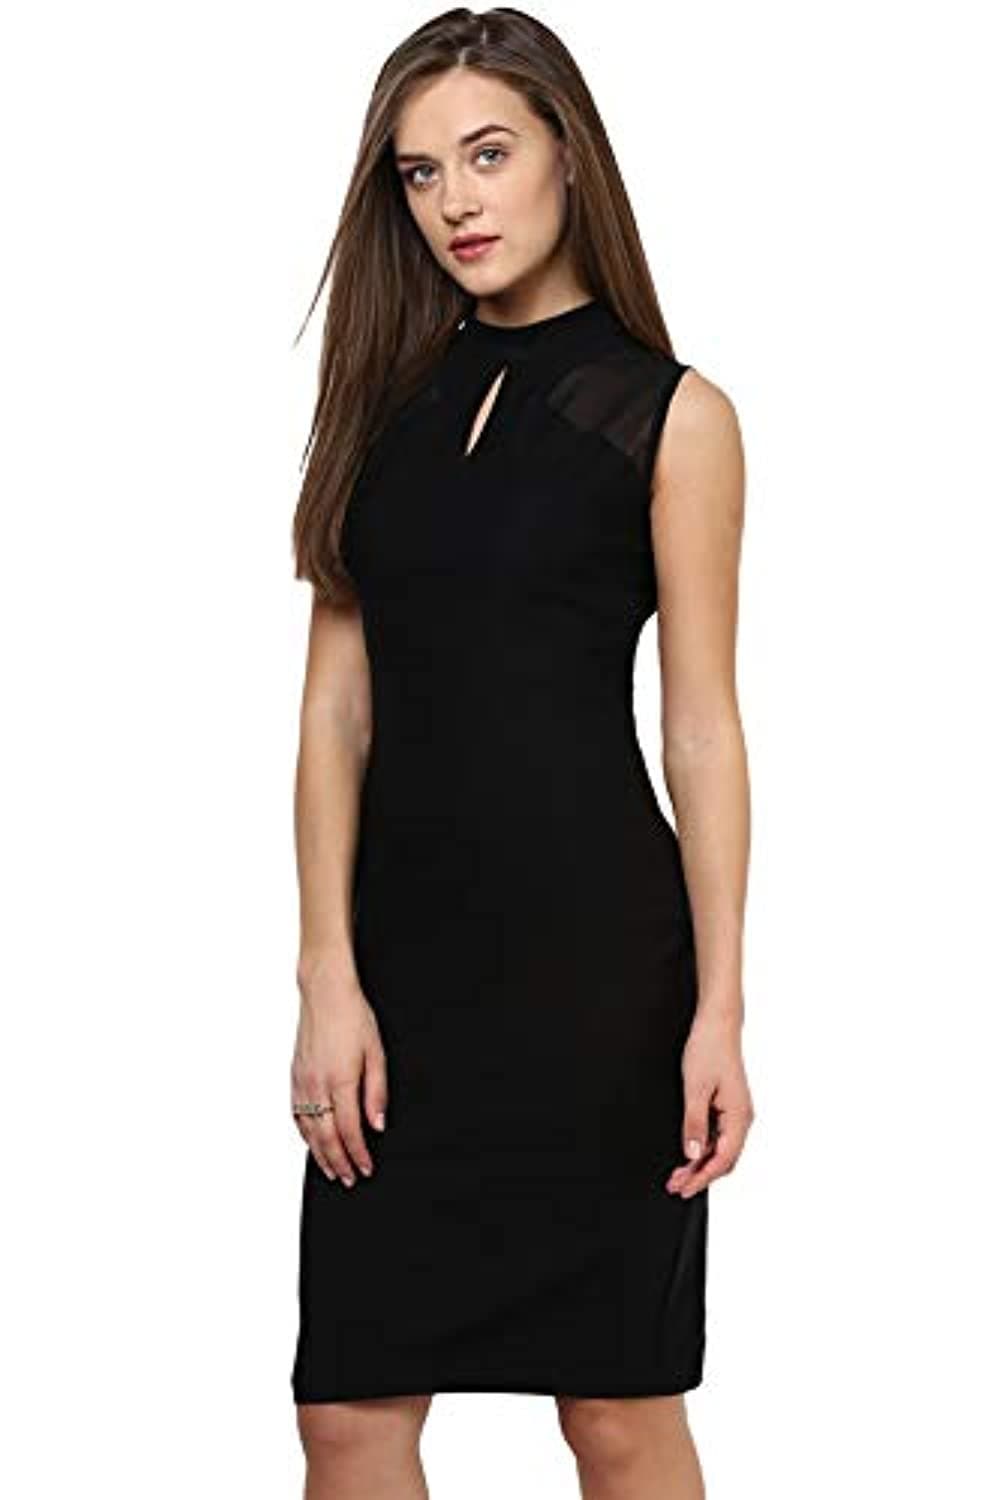 Girls One Piece Dresses - Buy Girls One Piece Dresses online in India